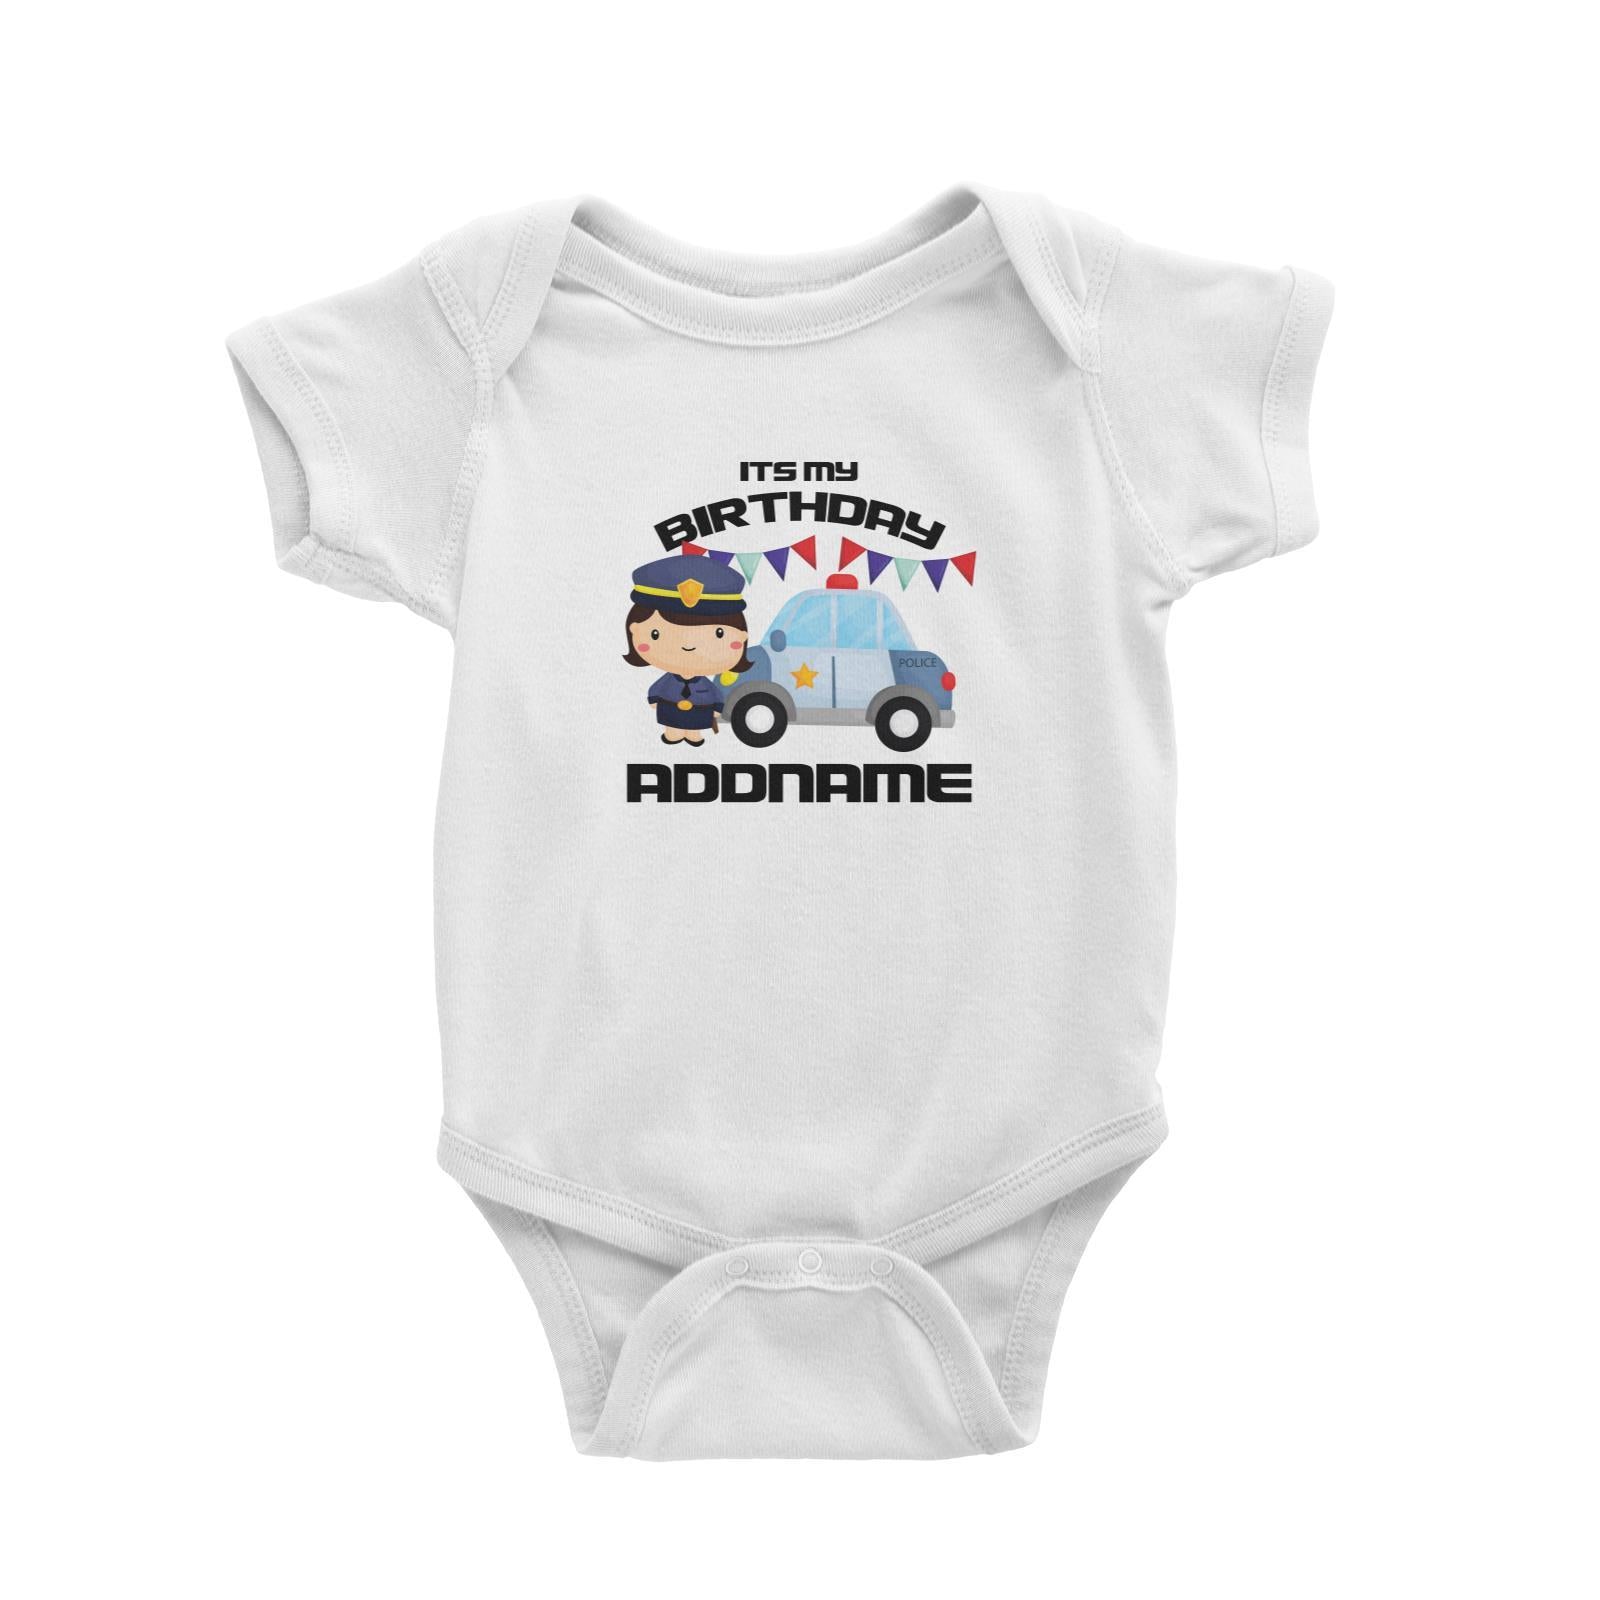 Birthday Police Officer Girl In Suit With Police Car Its My Birthday Addname Baby Romper